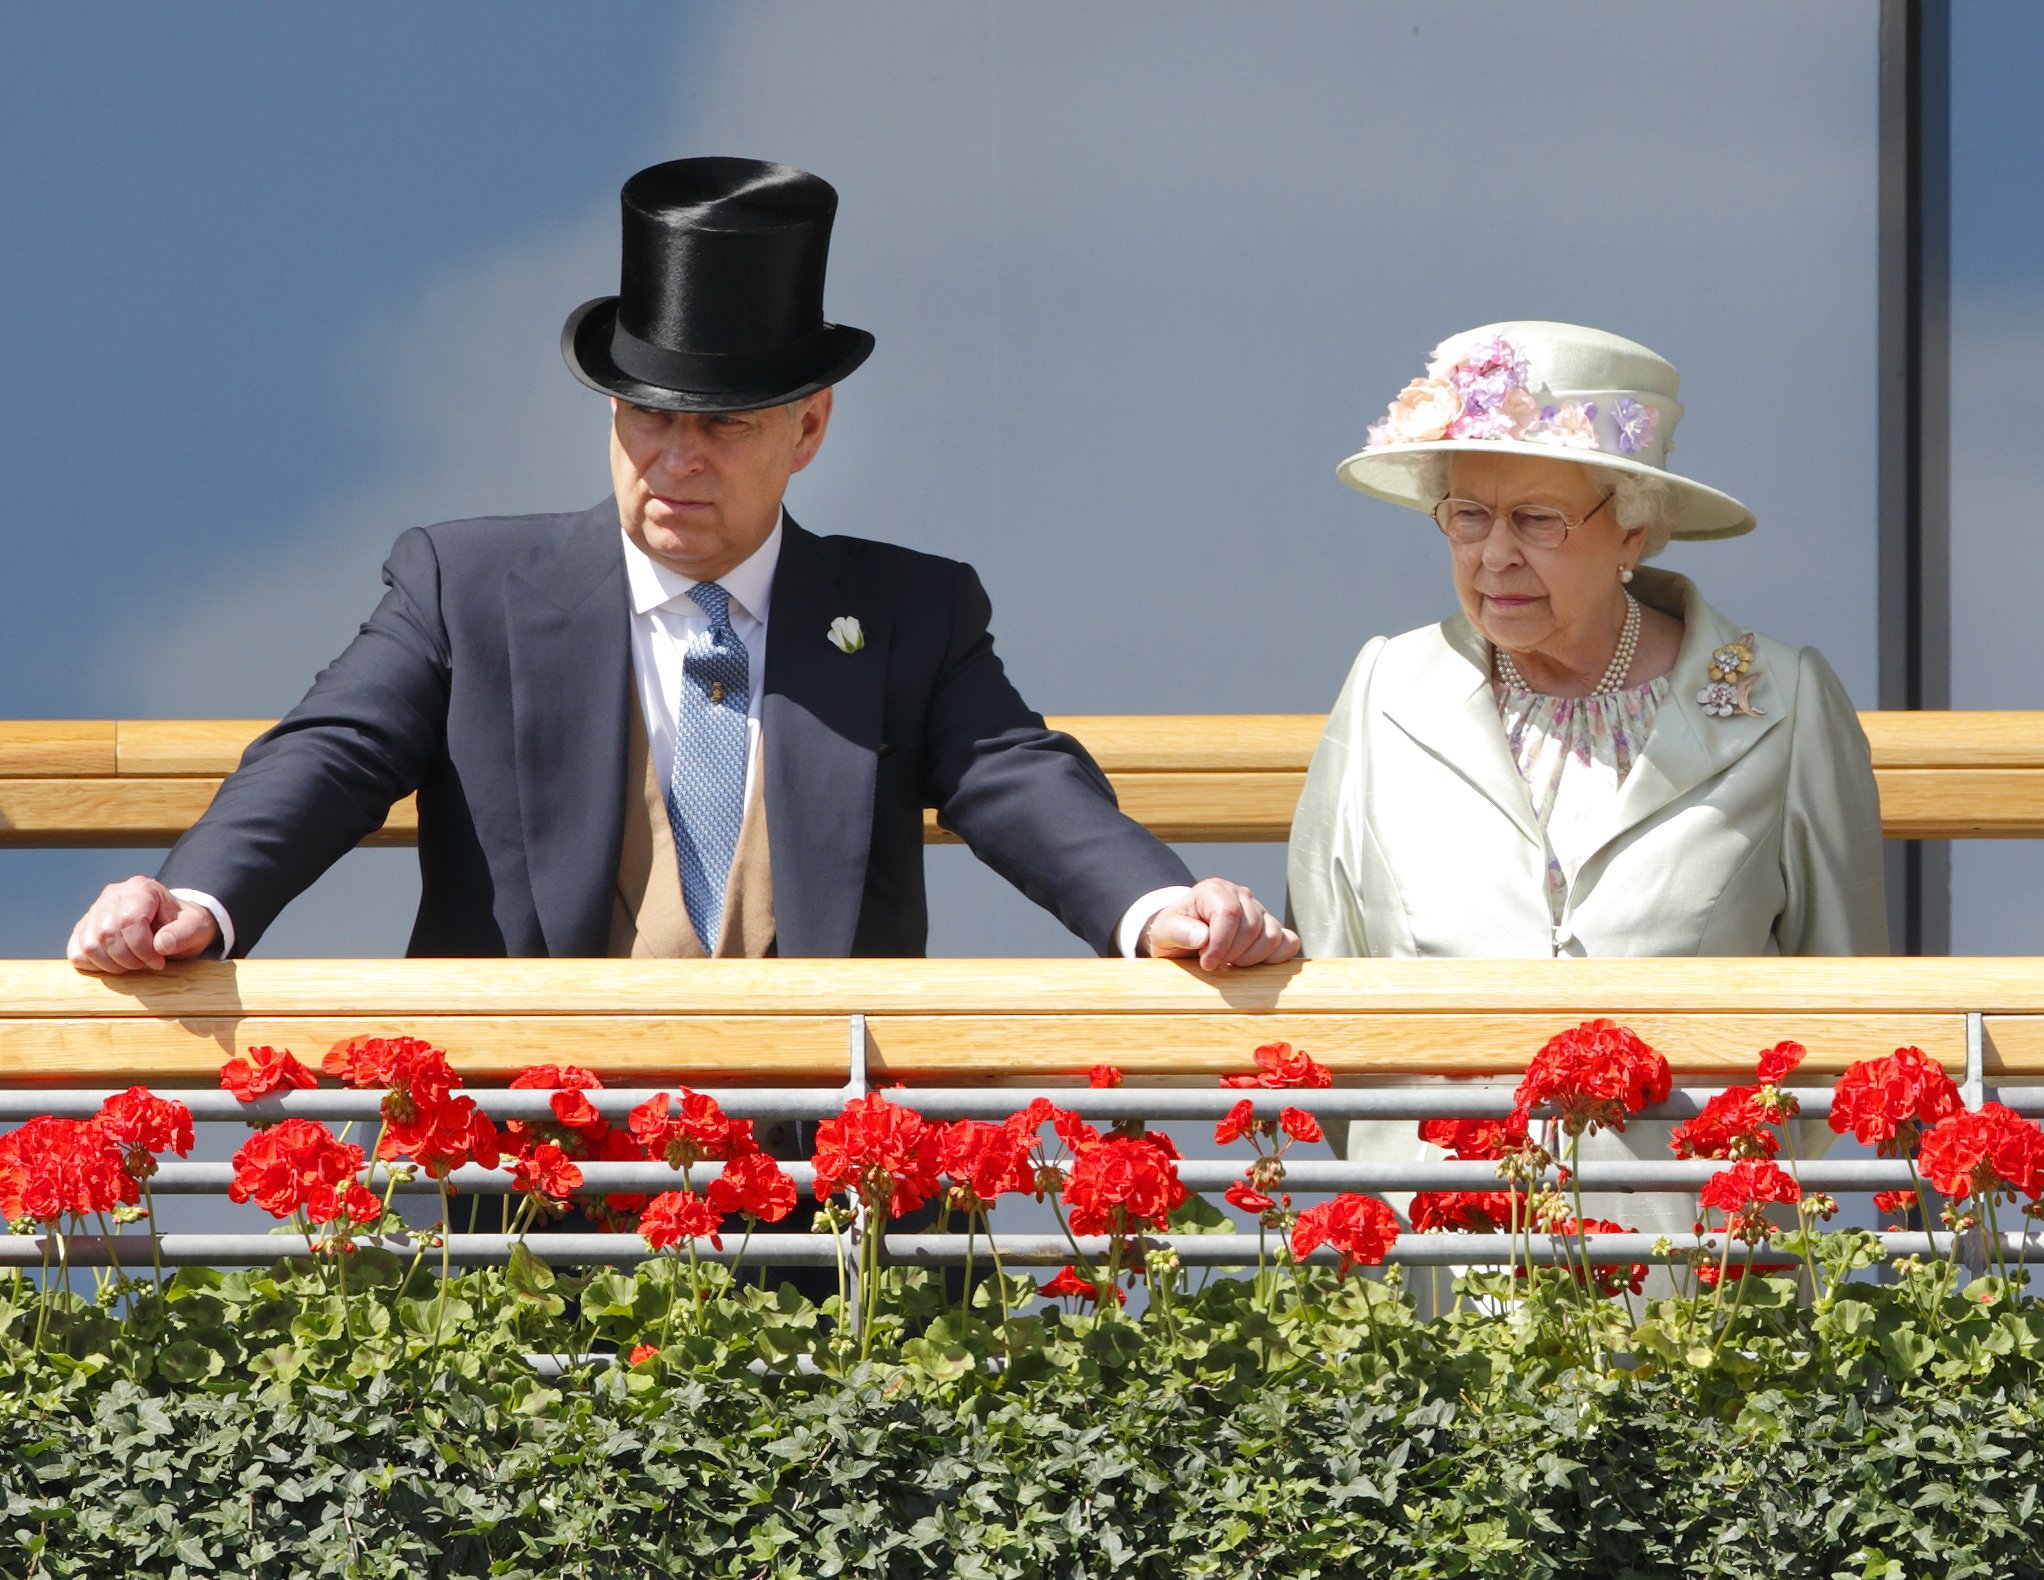 Prince Andrew, Duke of York & Queen Elizabeth II watch the horses in the parade ring as they attend Day 2 of Royal Ascot at Ascot Racecourse on June 18, 2014 in Ascot, England. | Source: Getty Images